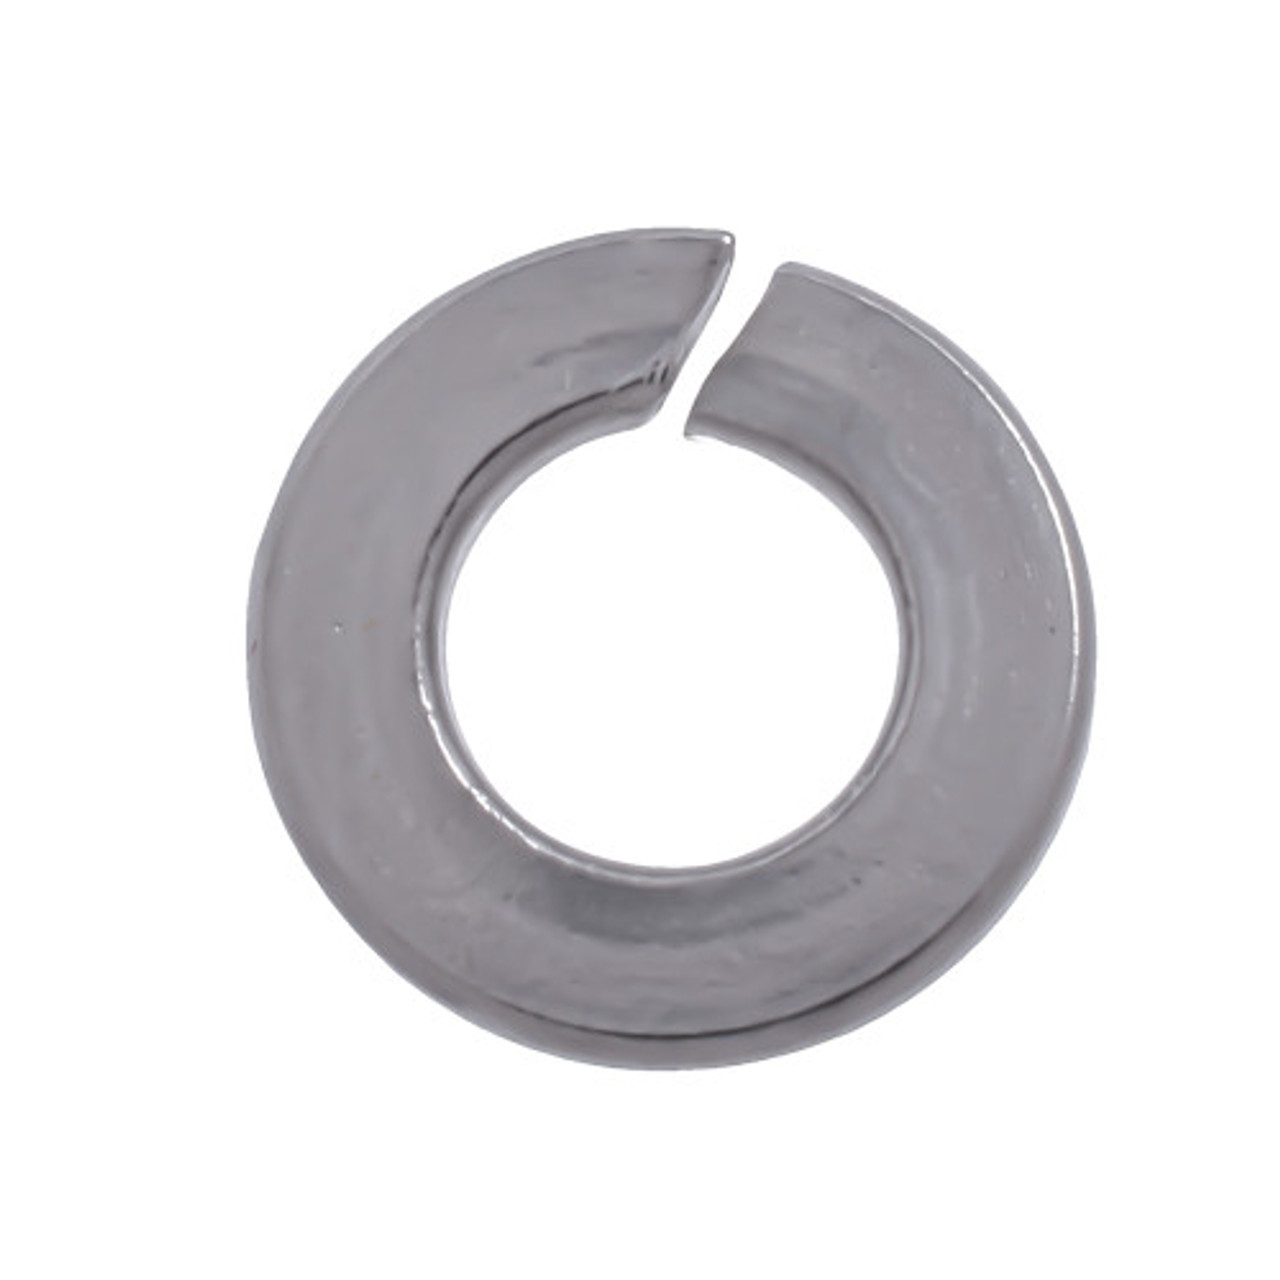 #2 18.8 Stainless Steel Lock Washer 100 Pc.   5058-002